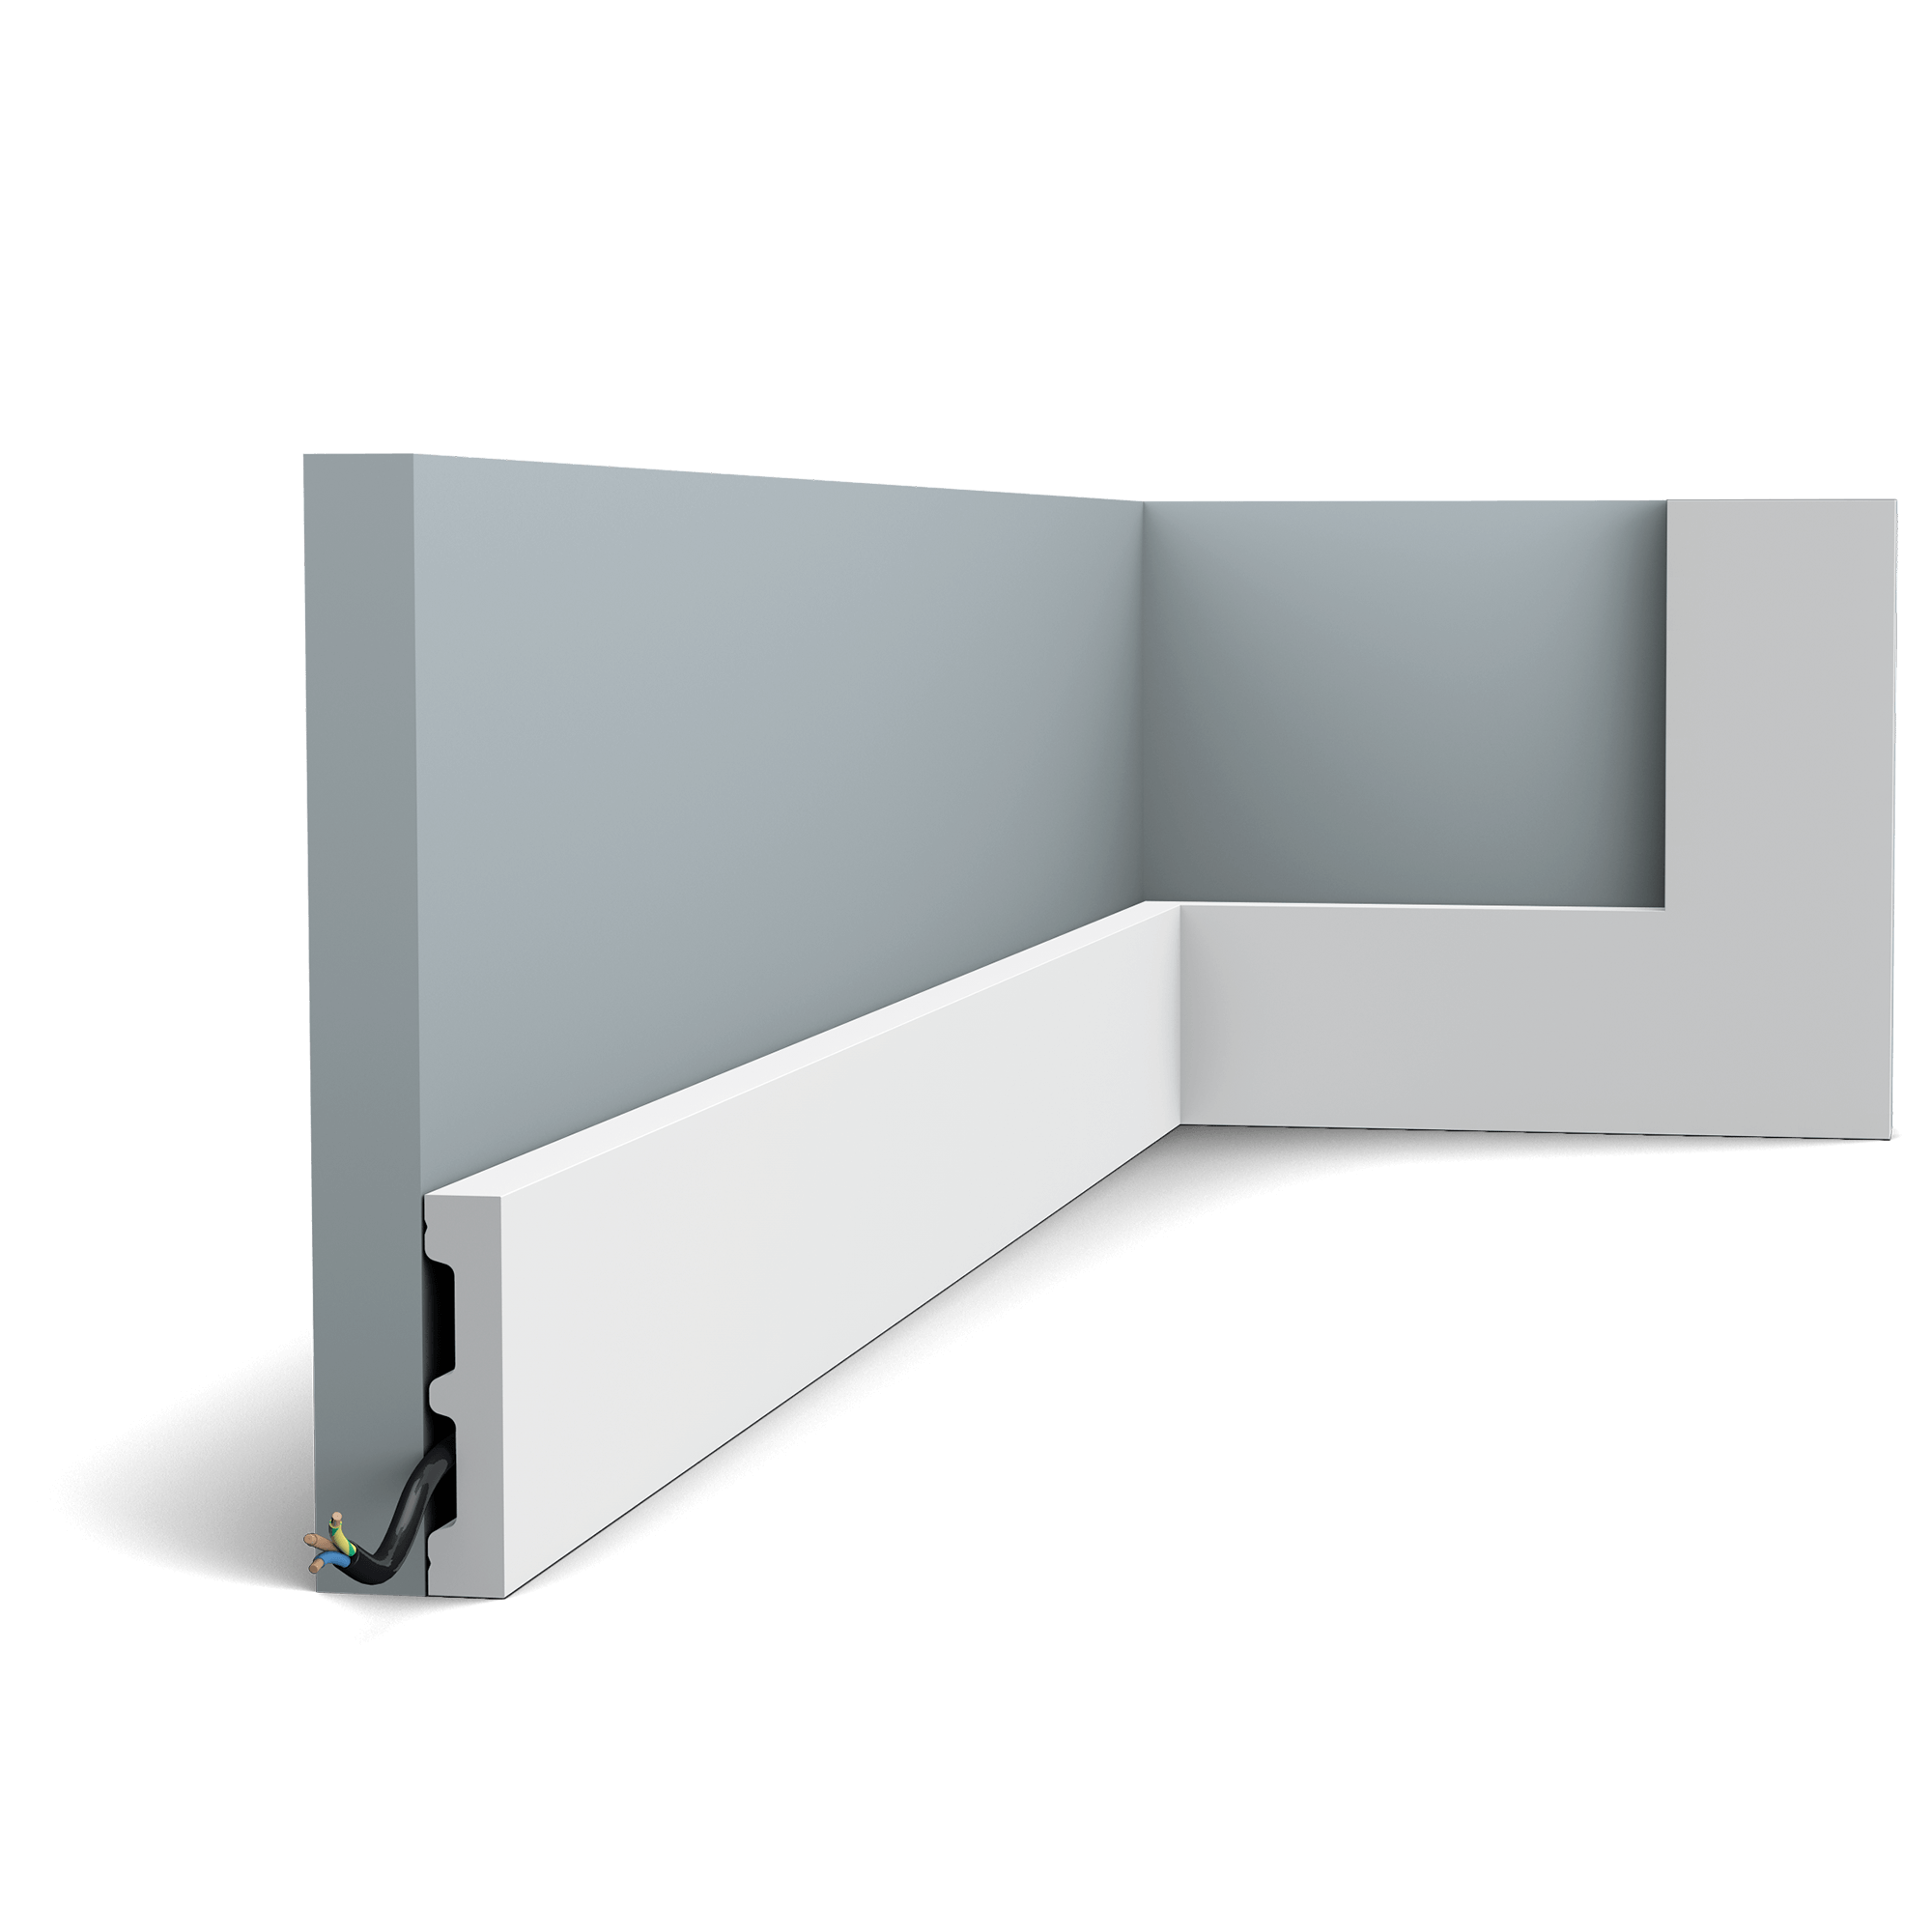 Our simplest skirting board is part of the SQUARE family. Use this multifunctional profile to fit your entire home with the same skirting board. All you need to do is select the correct size to fit your space.